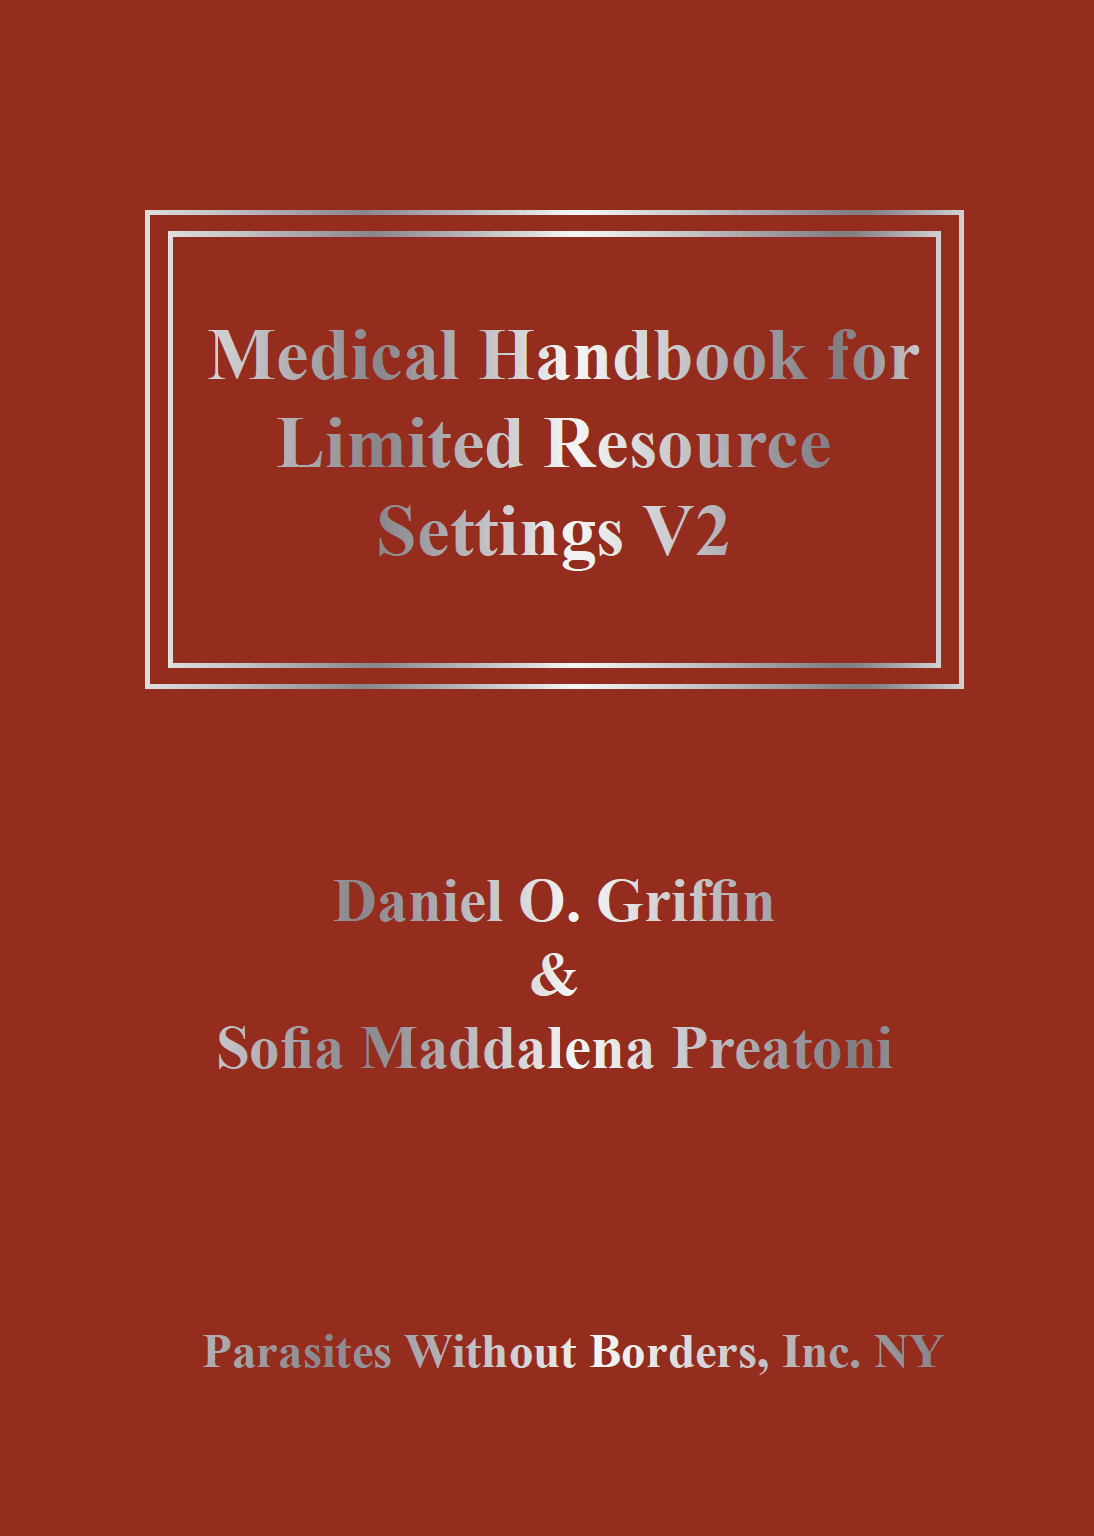 Medical Handbook for Limited Resource Settings V2 COVER